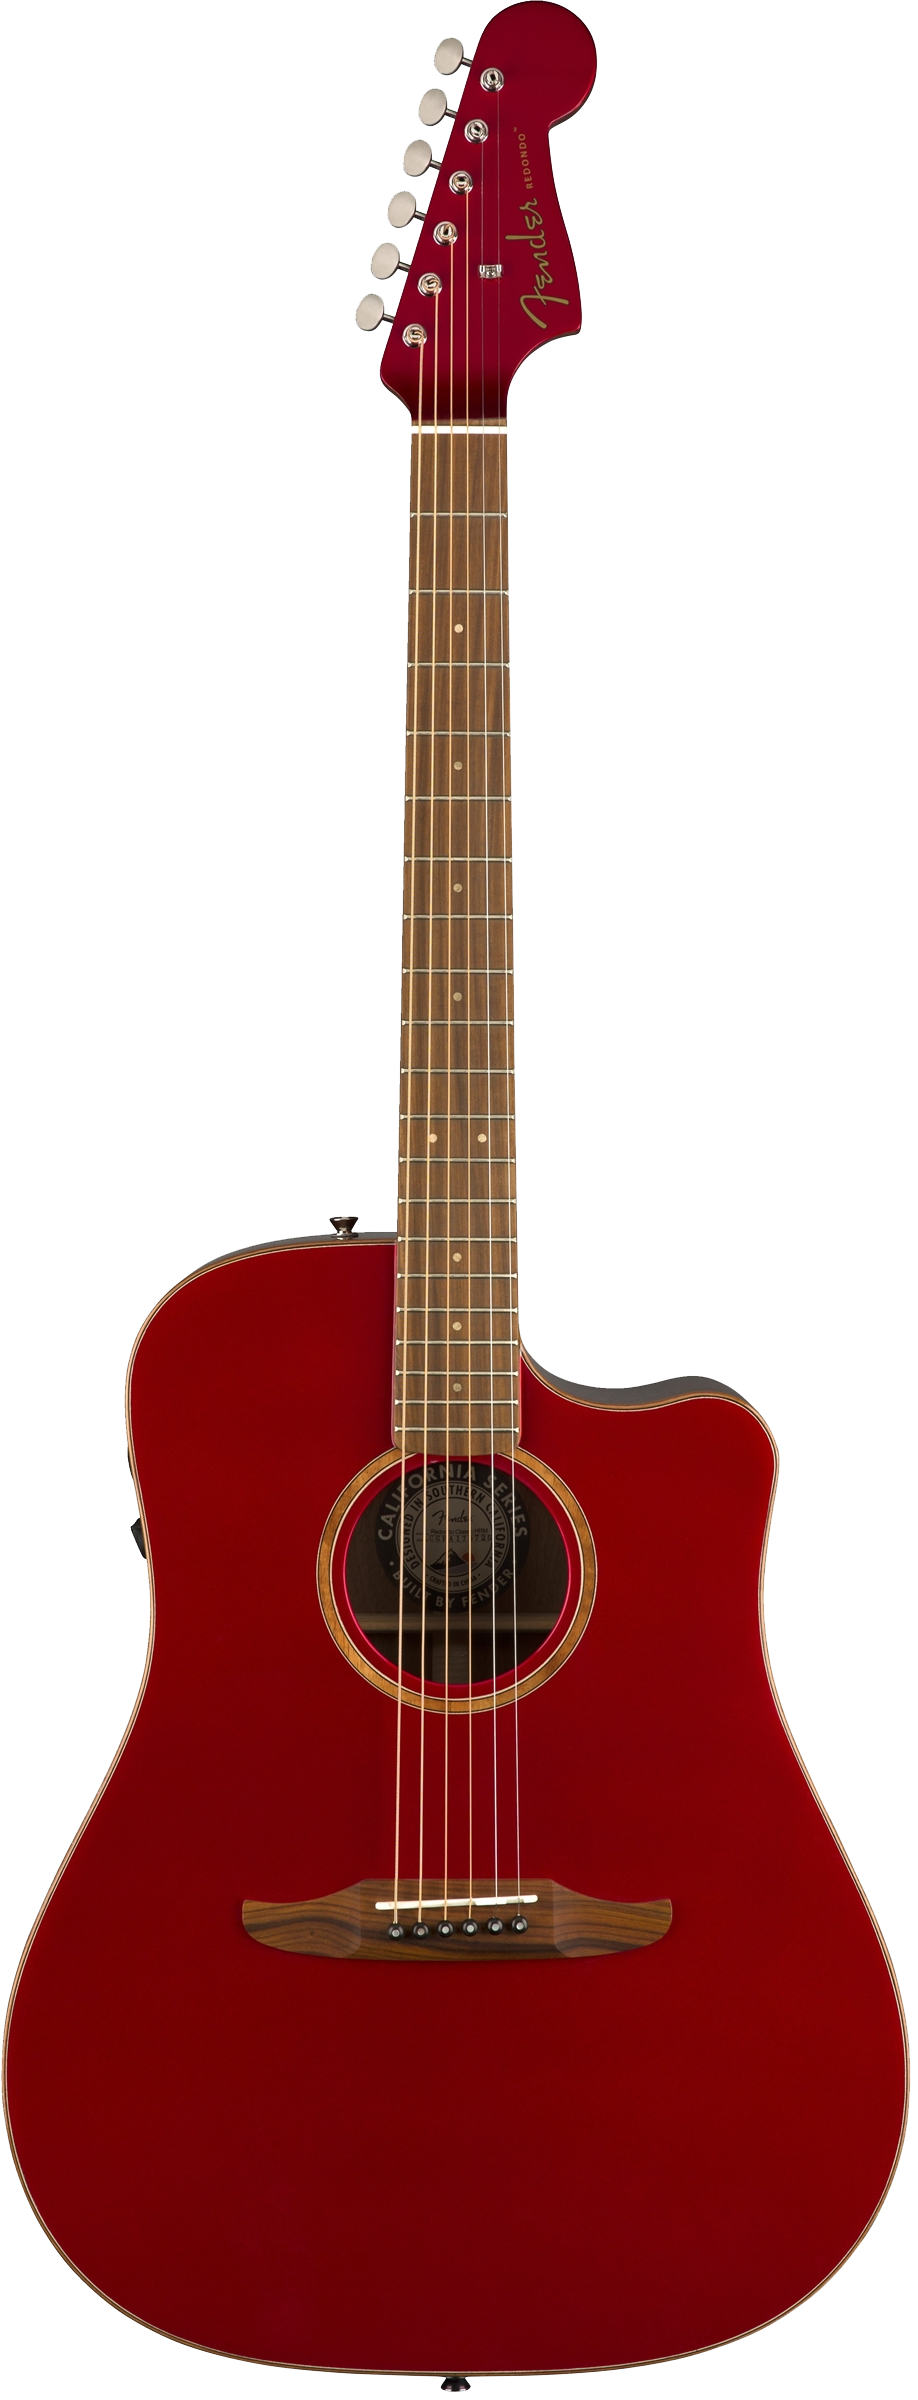 Fender Redondo Classic Acoustic / Guitar - Hot Rod Red Metall - Grass Roots Music Store